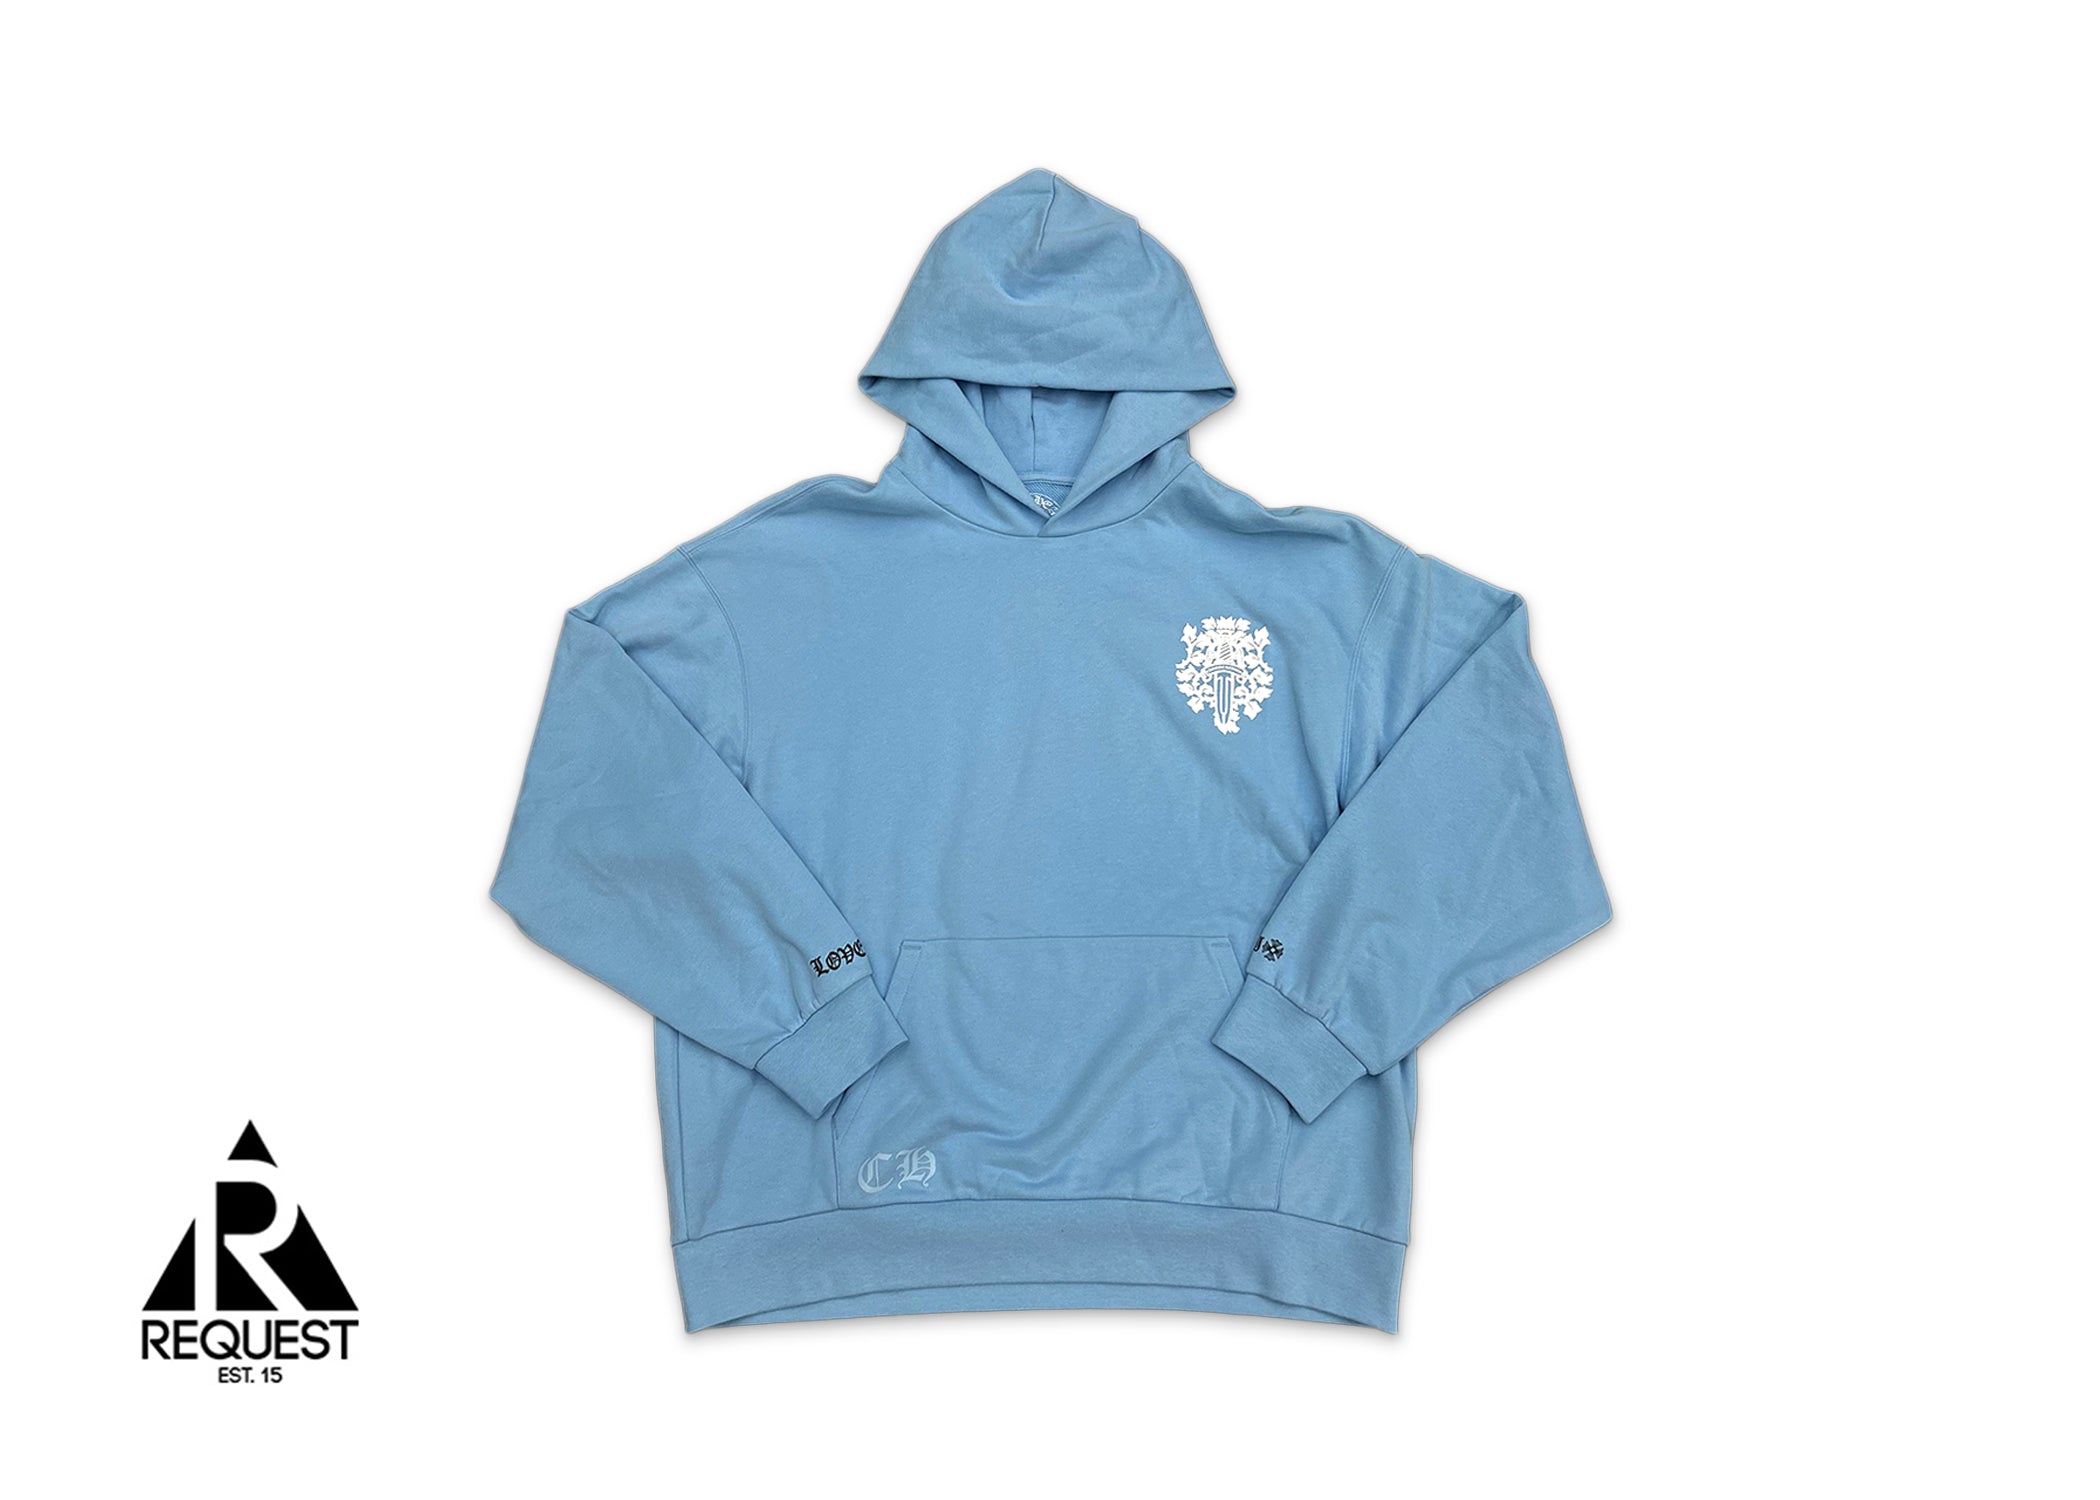 Chrome Hearts Dagger Hoodie Miami Art Basel Exclusive "Baby Blue”